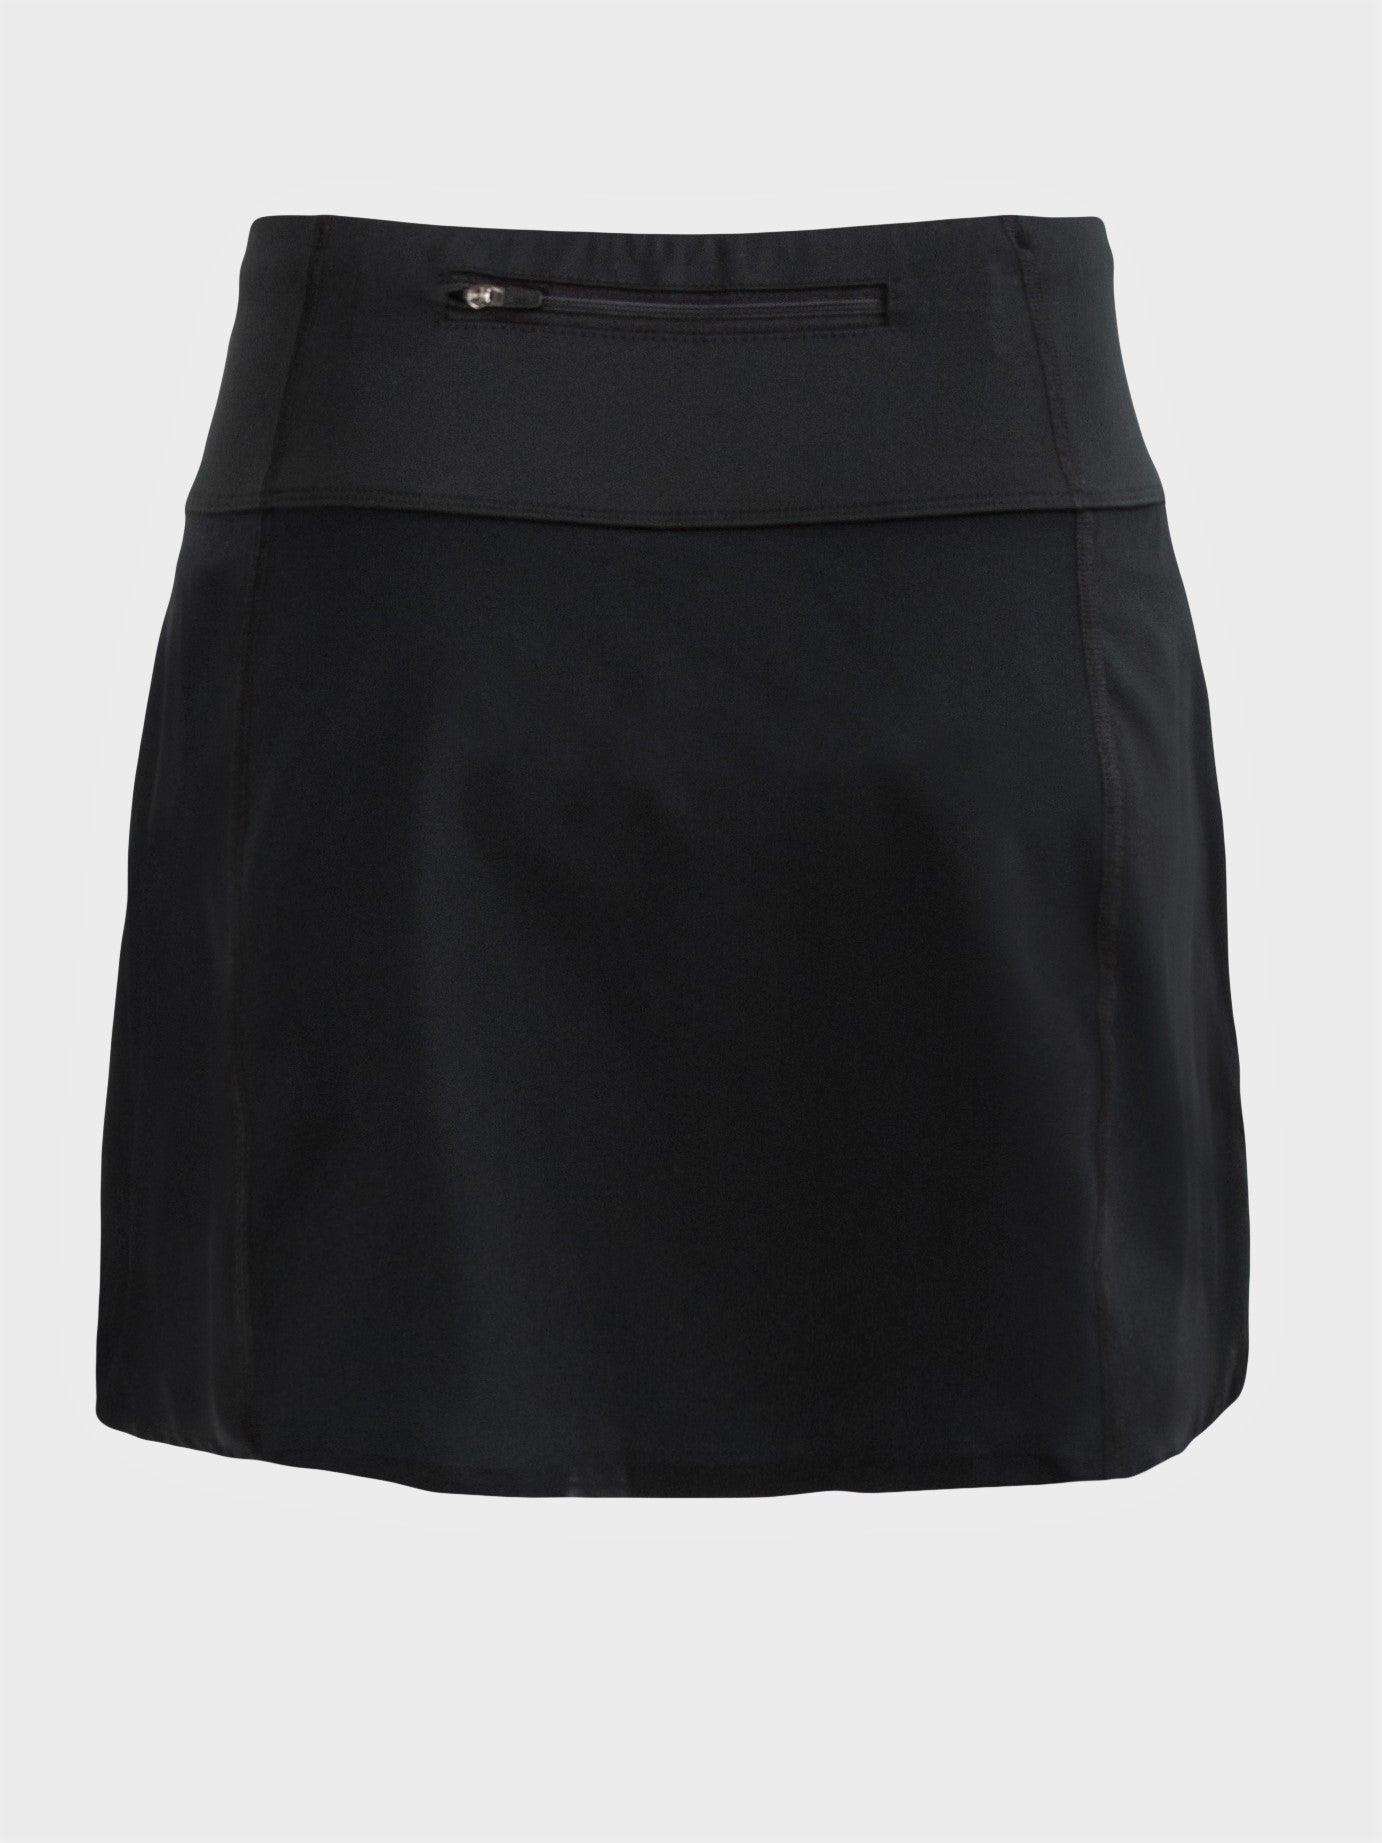 Black running skirt with inner shorts and pockets - NIGHT